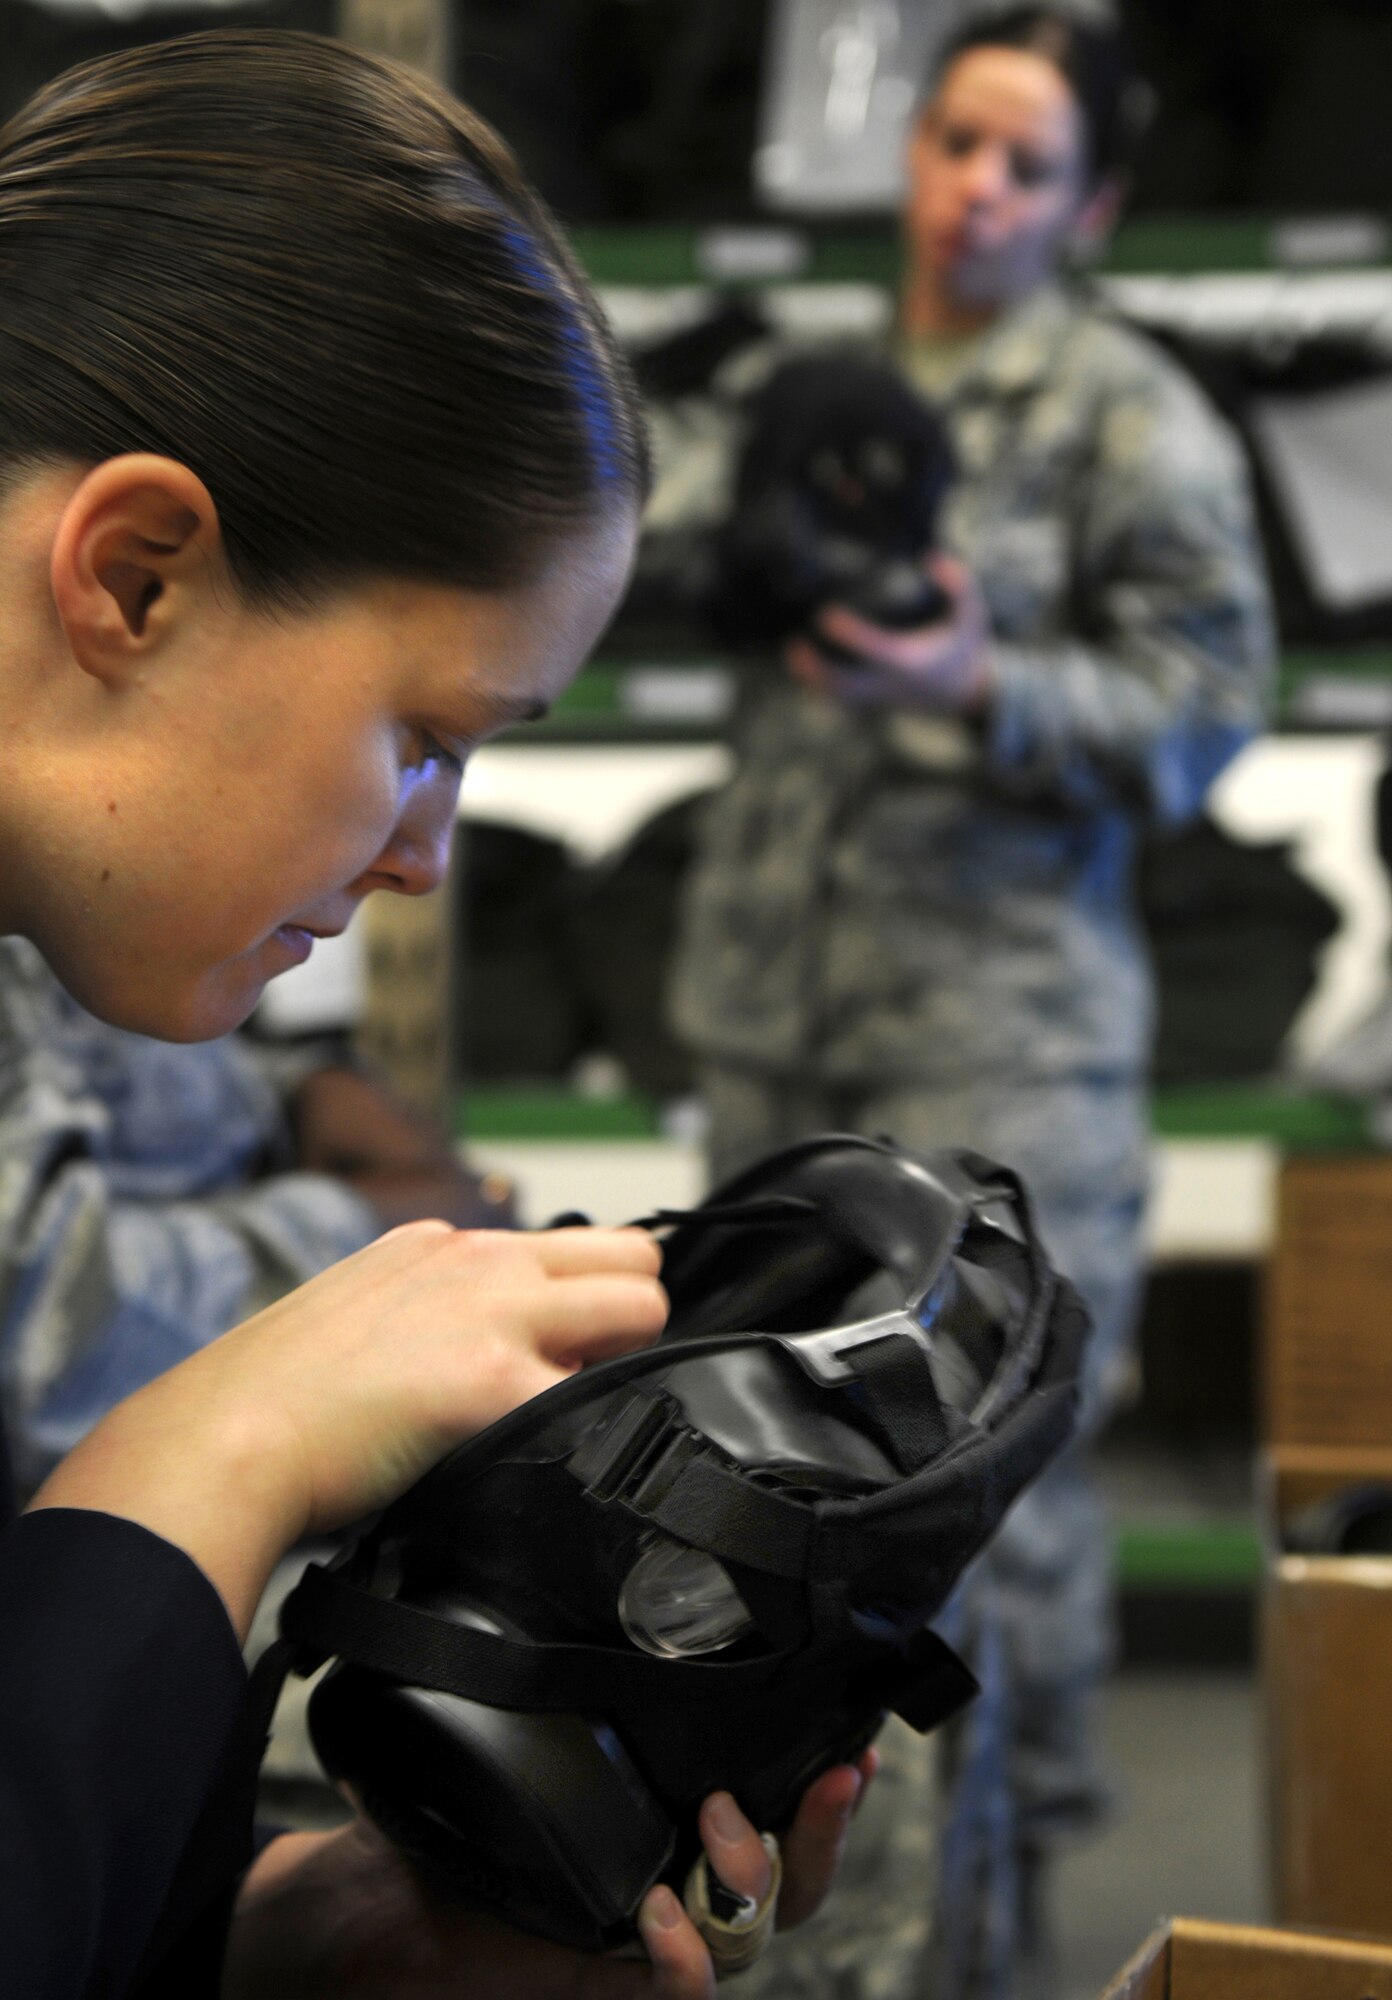 U.S. Air Force Senior Airman Tara Horvat (left), 86th Security Forces Squadron, assembles her issued M50 protective mask as Airman 1st Class Renee Malsom (right), 886th Civil Engineer Squadron, Ramstein Air Base, briefs a class on the proper usage of the new M50 protective mask, November 9, 2009.  The M50 protective mask will be replacing the current MCU-2P protective mask.  (U.S. Air Force photo by Staff Sgt. Charity Barrett)